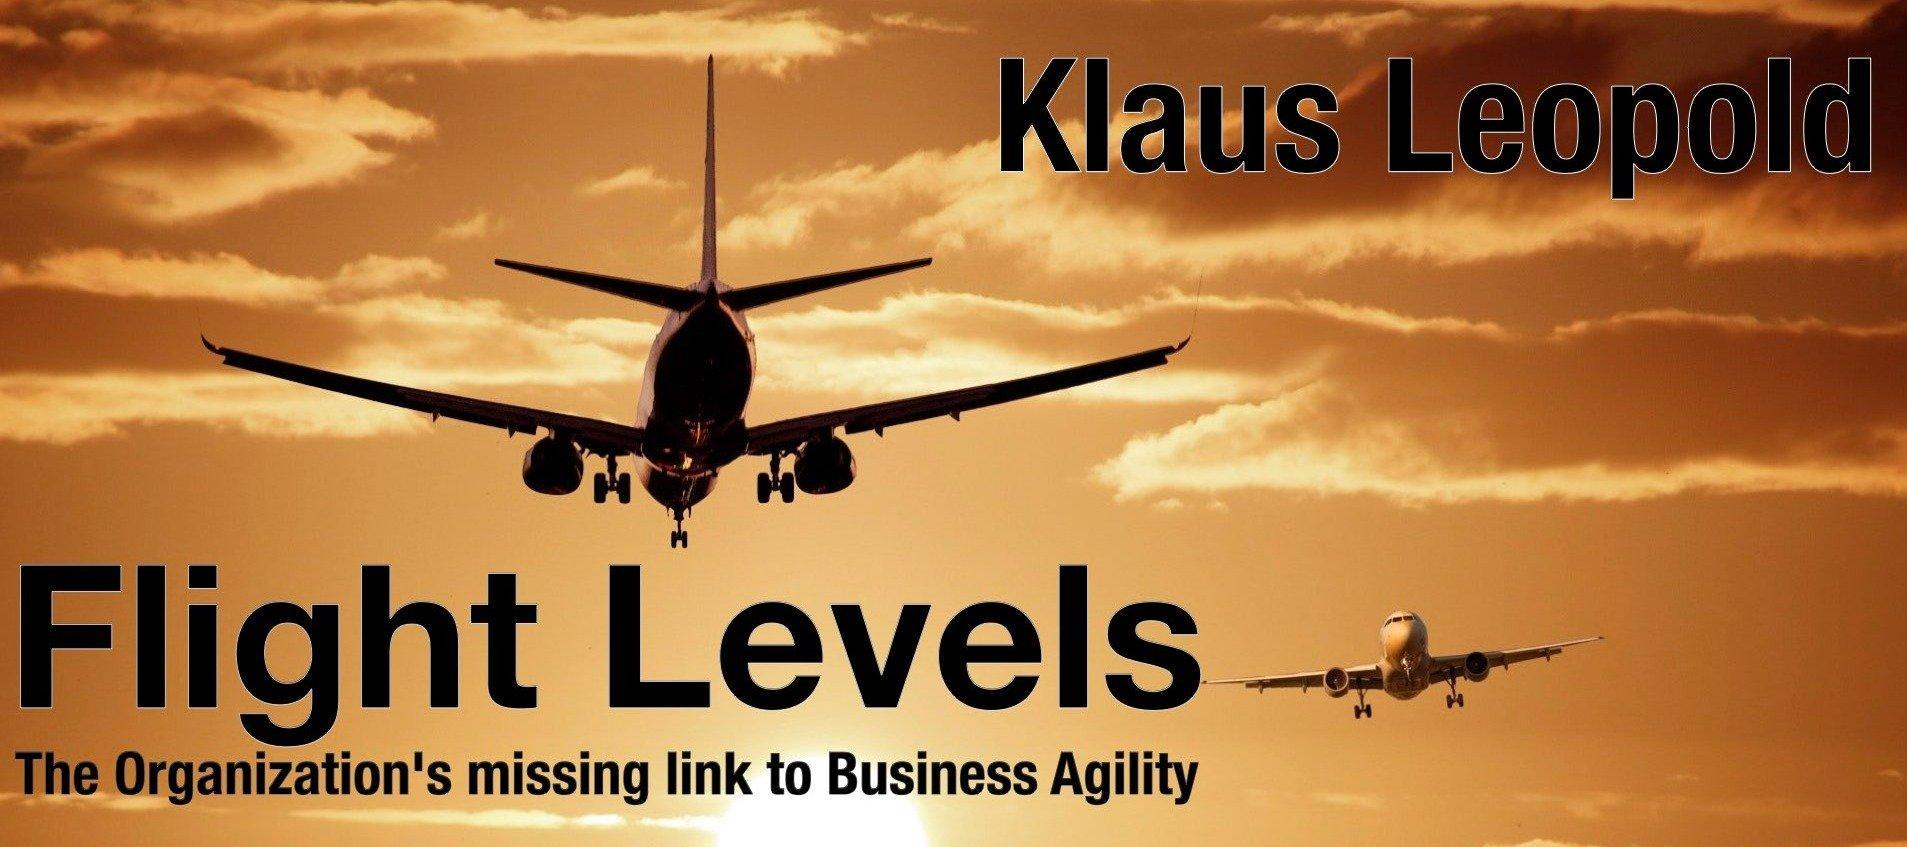 Flight Levels - The Organization's missing link to Business Agility